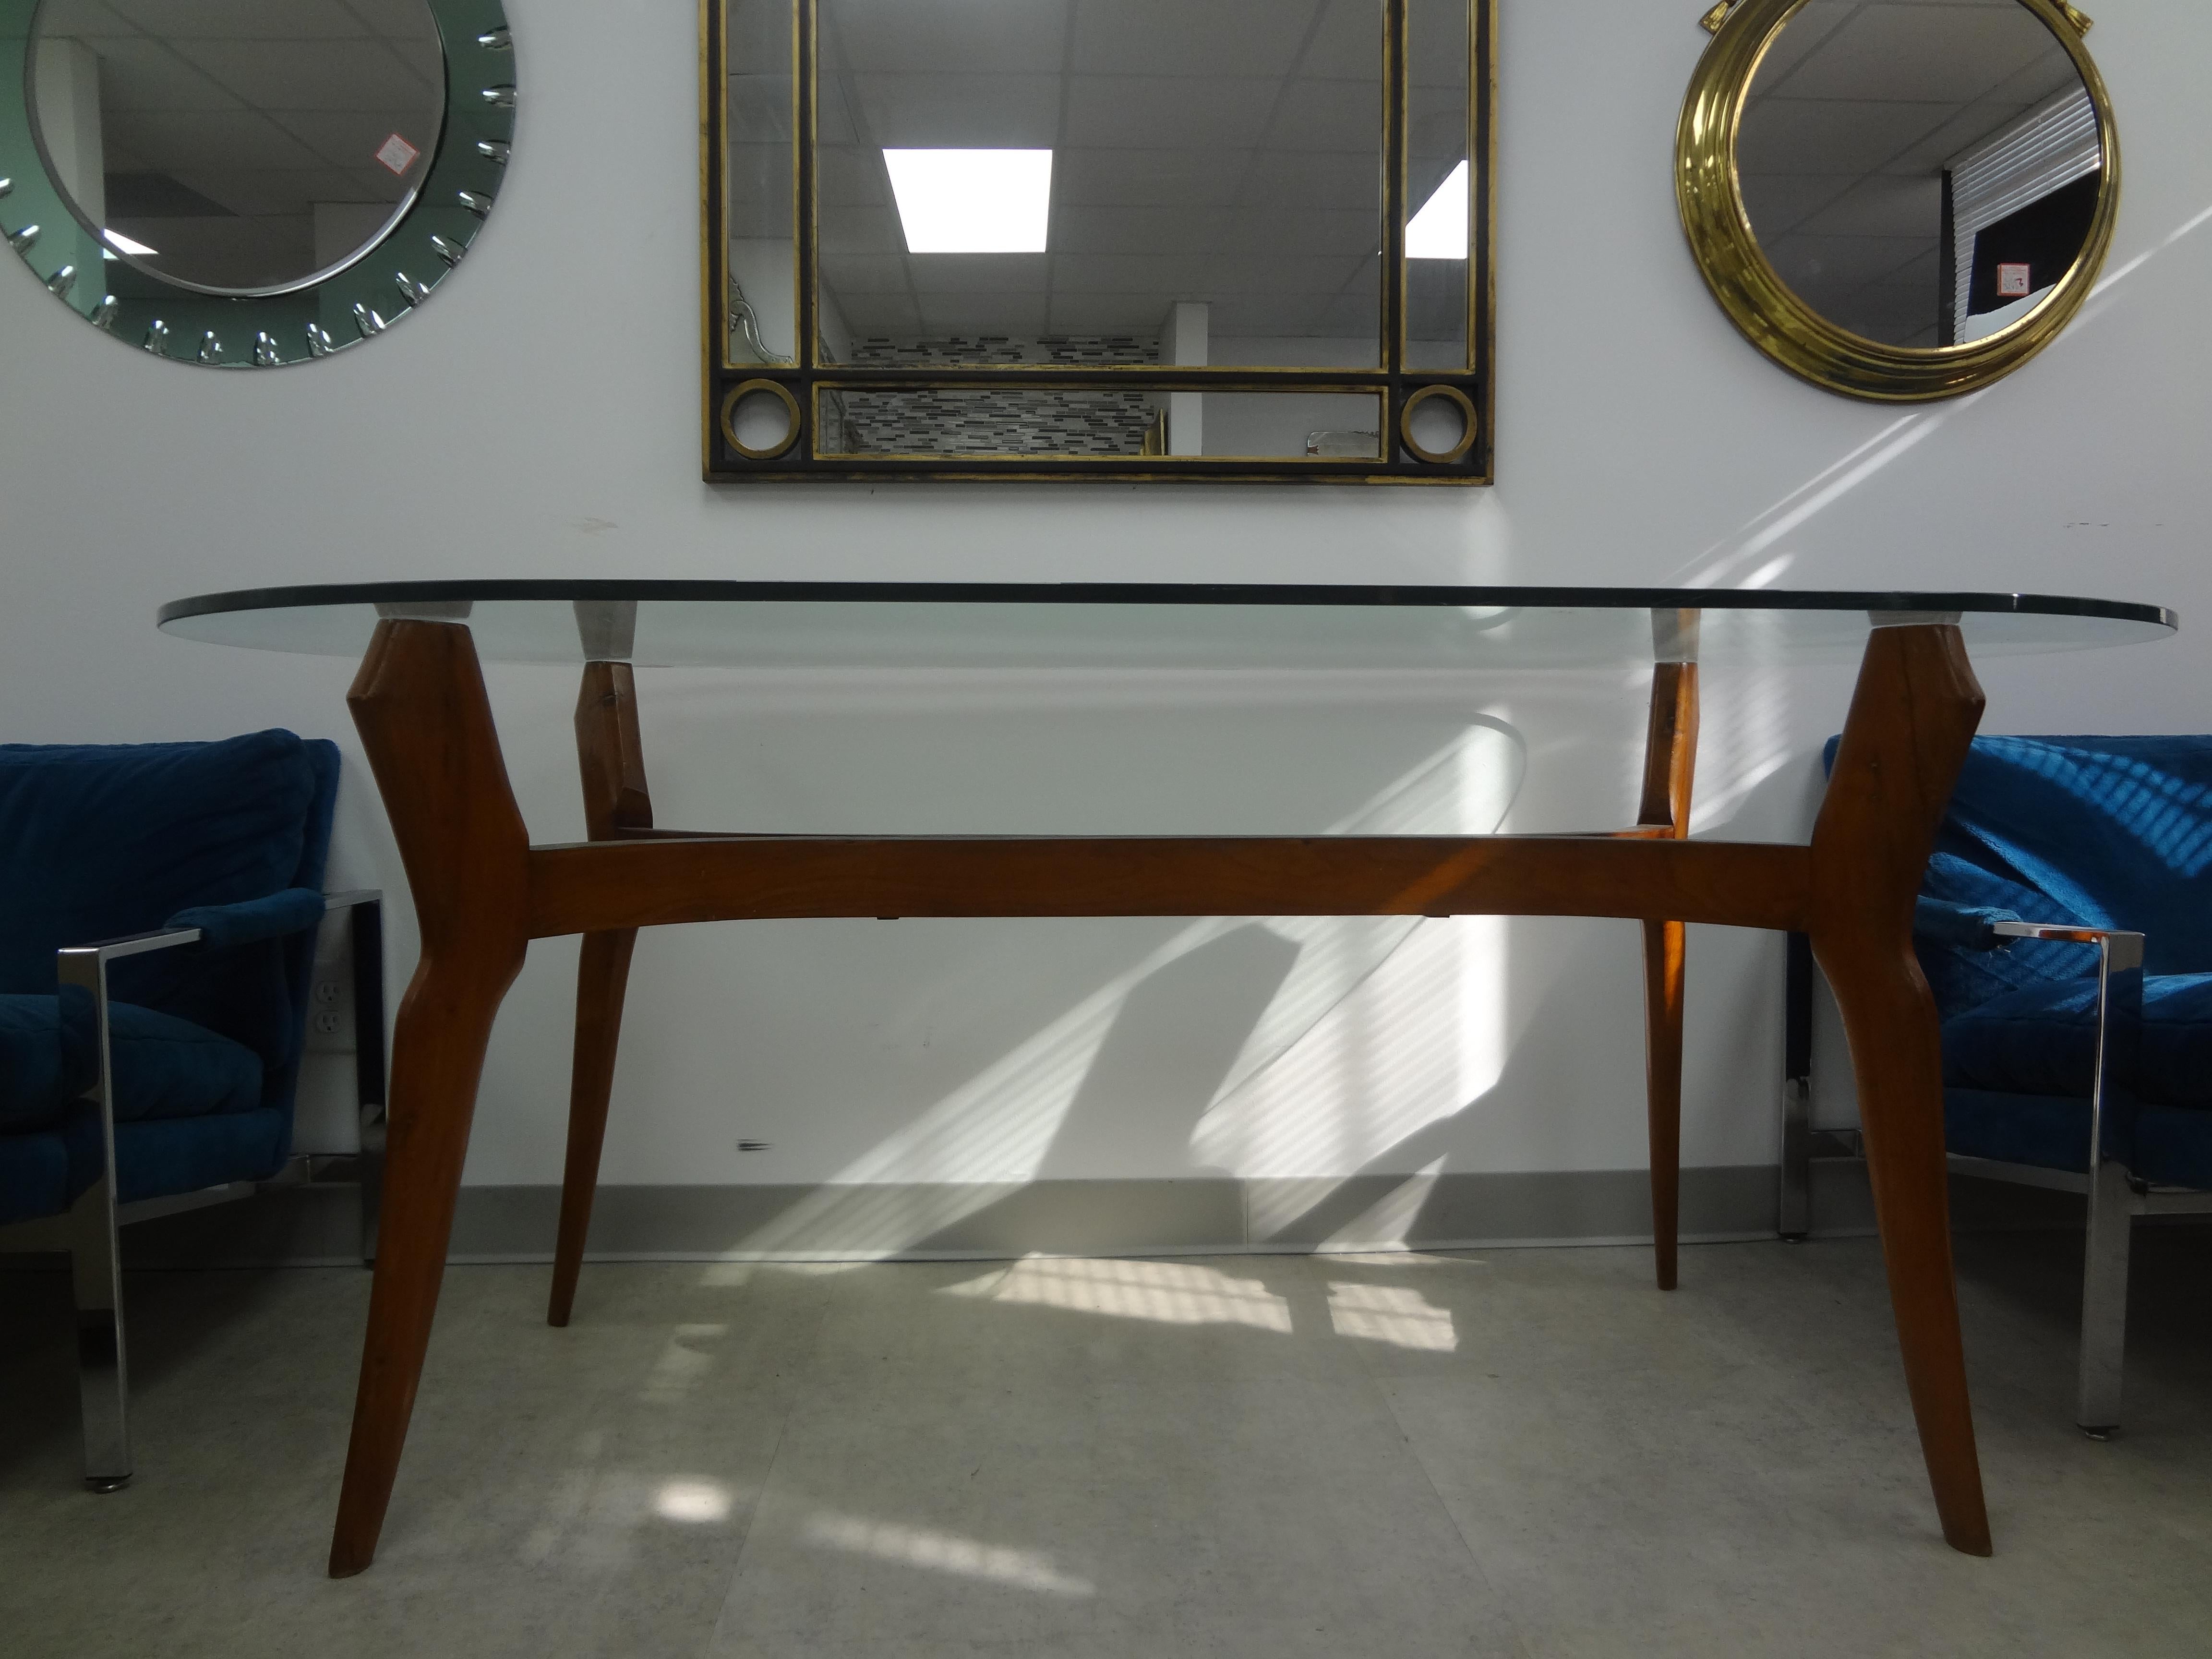 Italian Modern Sculptural Dining Table With Glass Top.
This stunning Gio Ponti inspired Italian mid century modern walnut table has beautiful lines and the original half inch oval glass top. Our versatile table can be used as a dining table, center